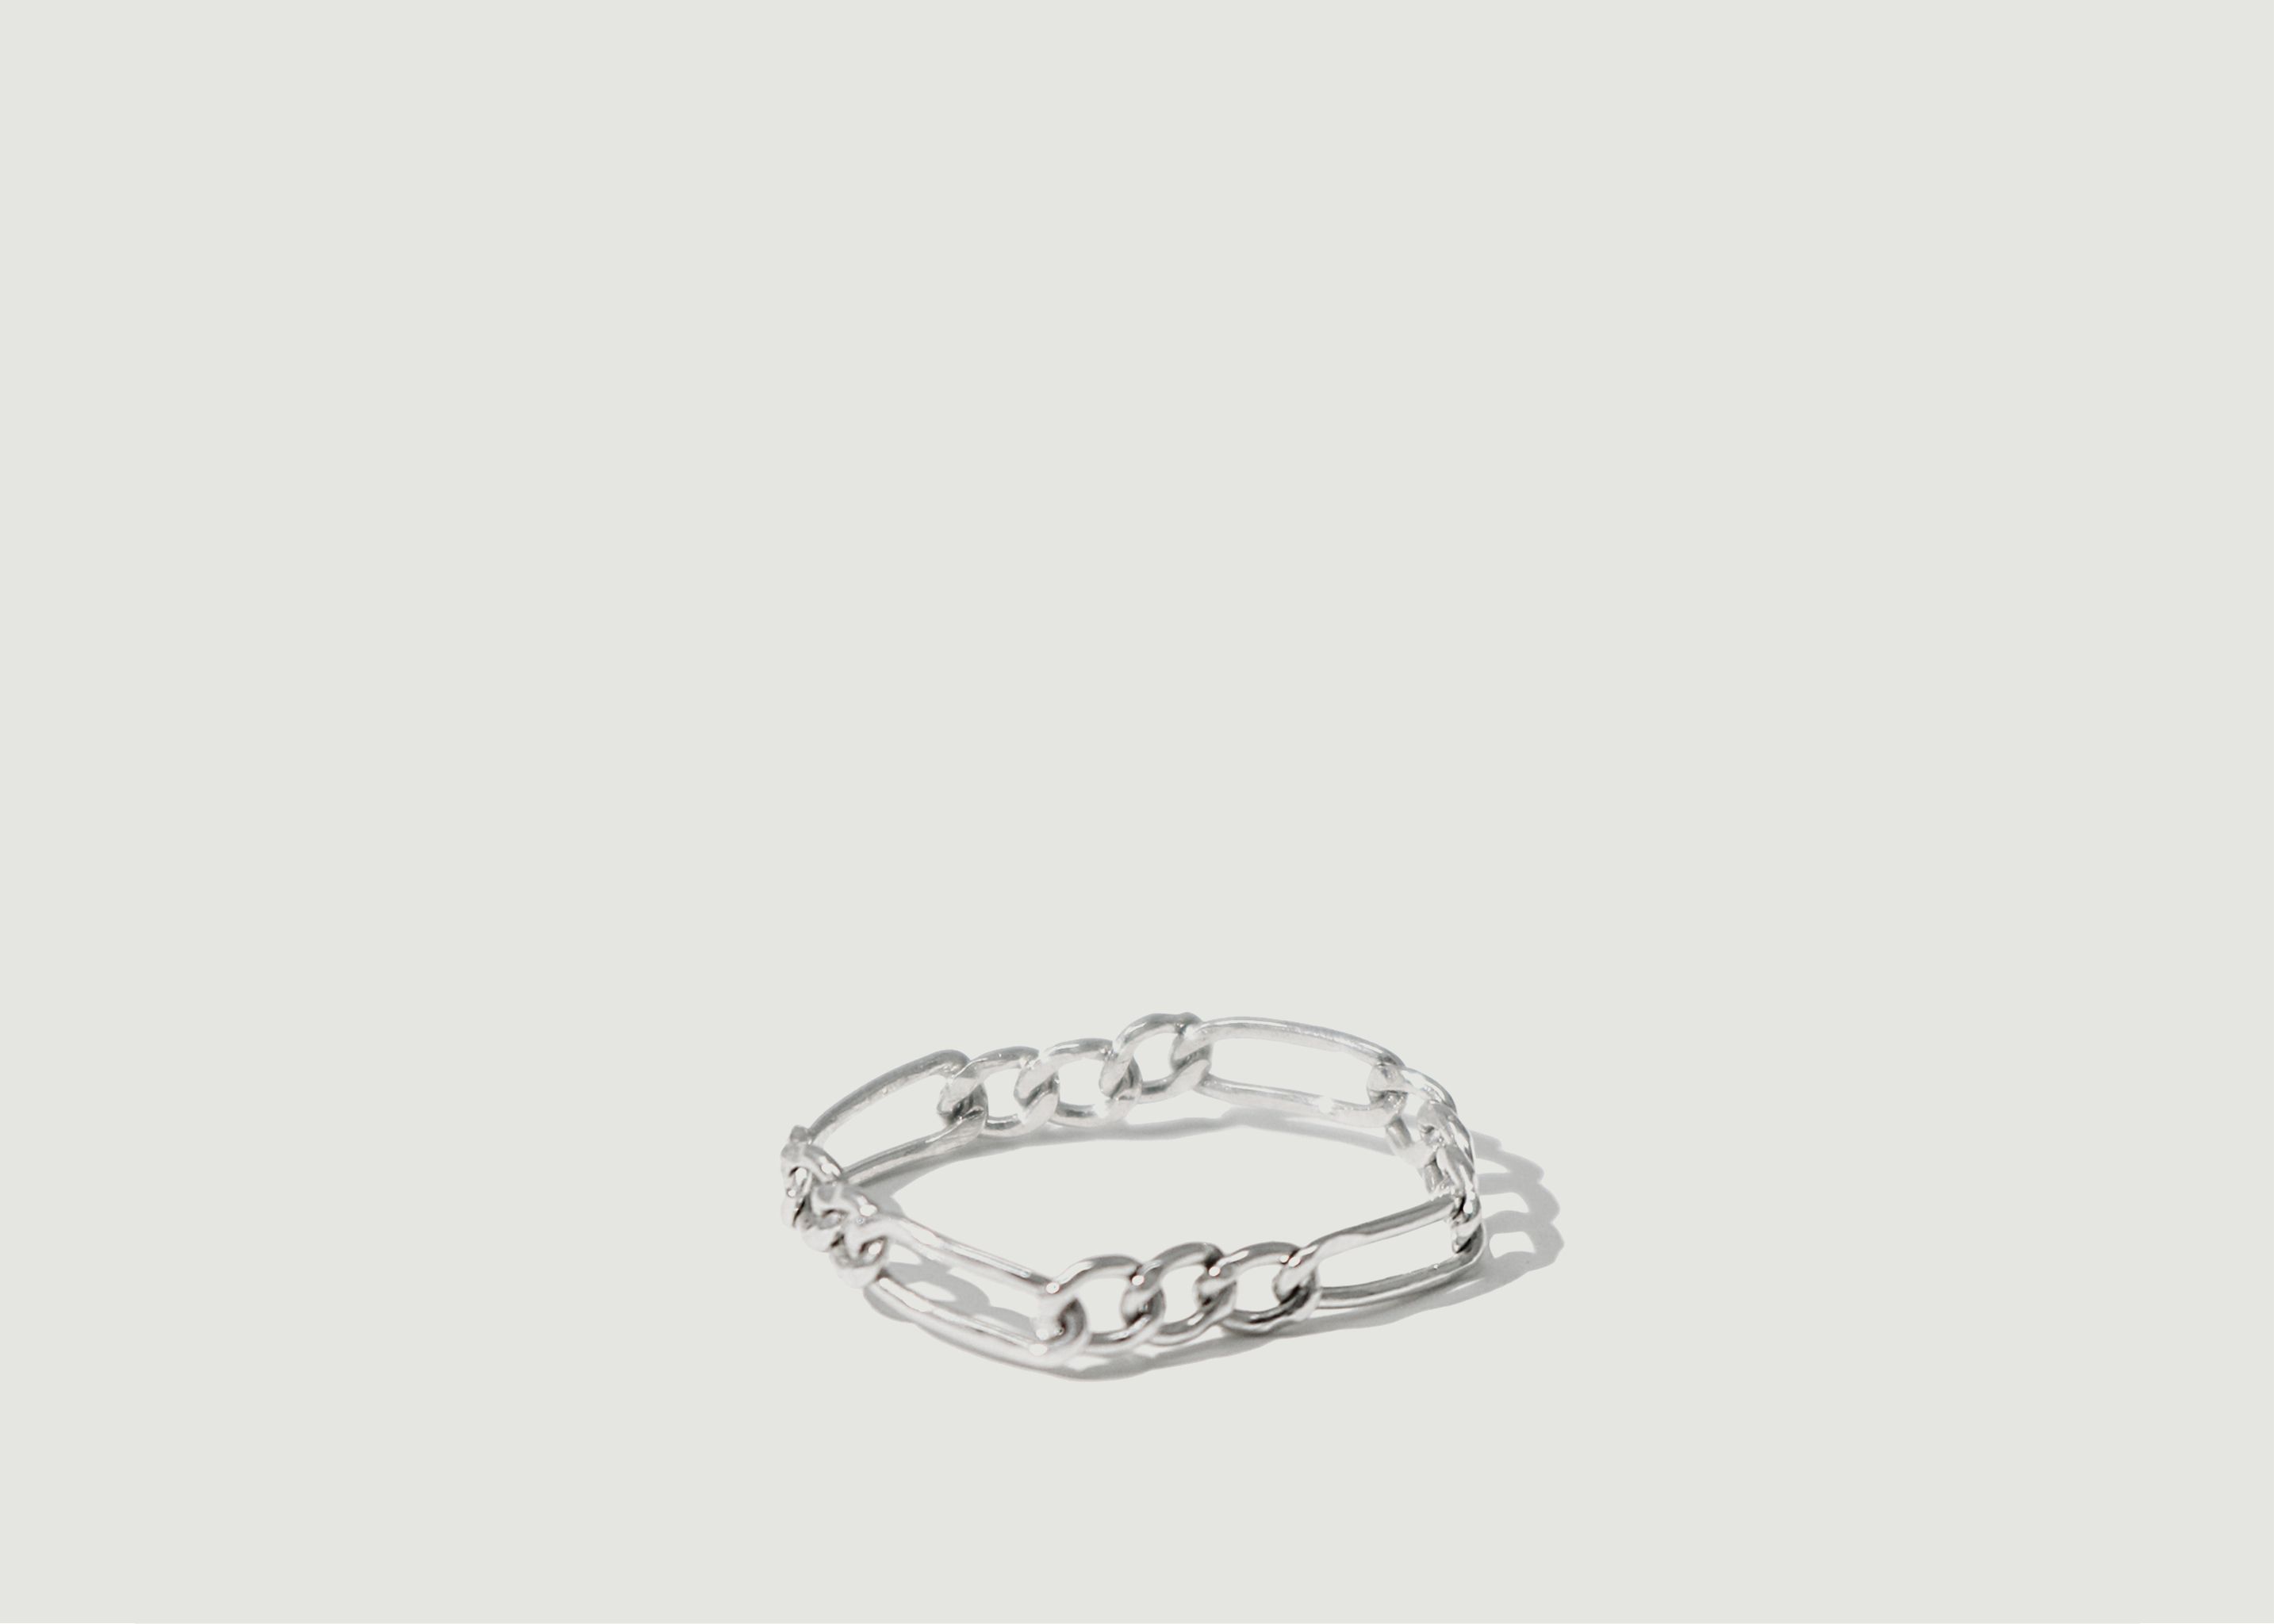 Collapsible Chain Style B Ring - CLED